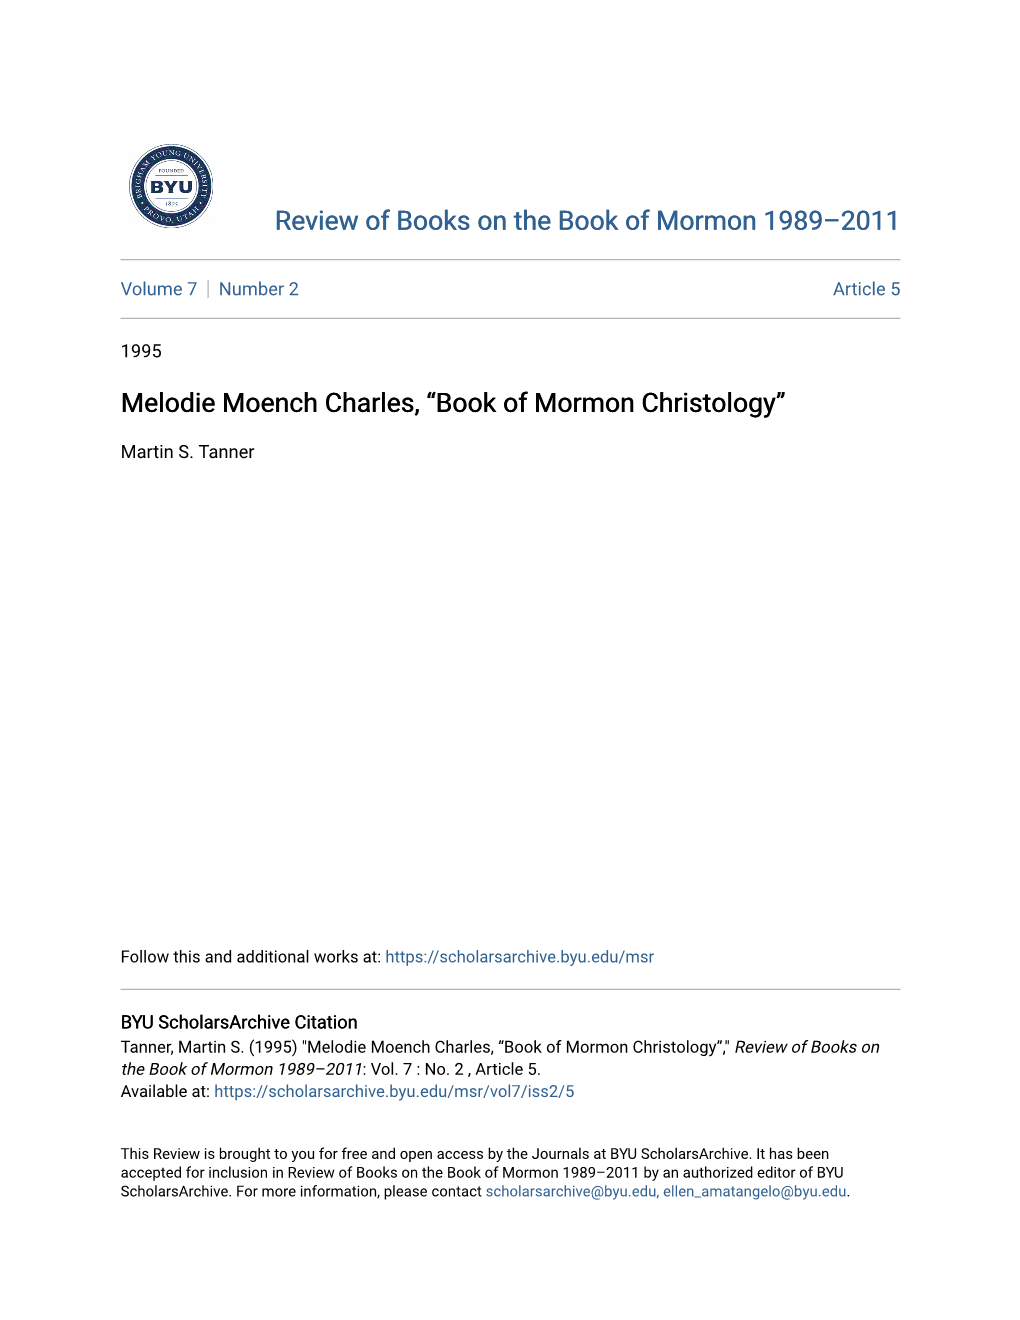 Melodie Moench Charles, “Book of Mormon Christology”